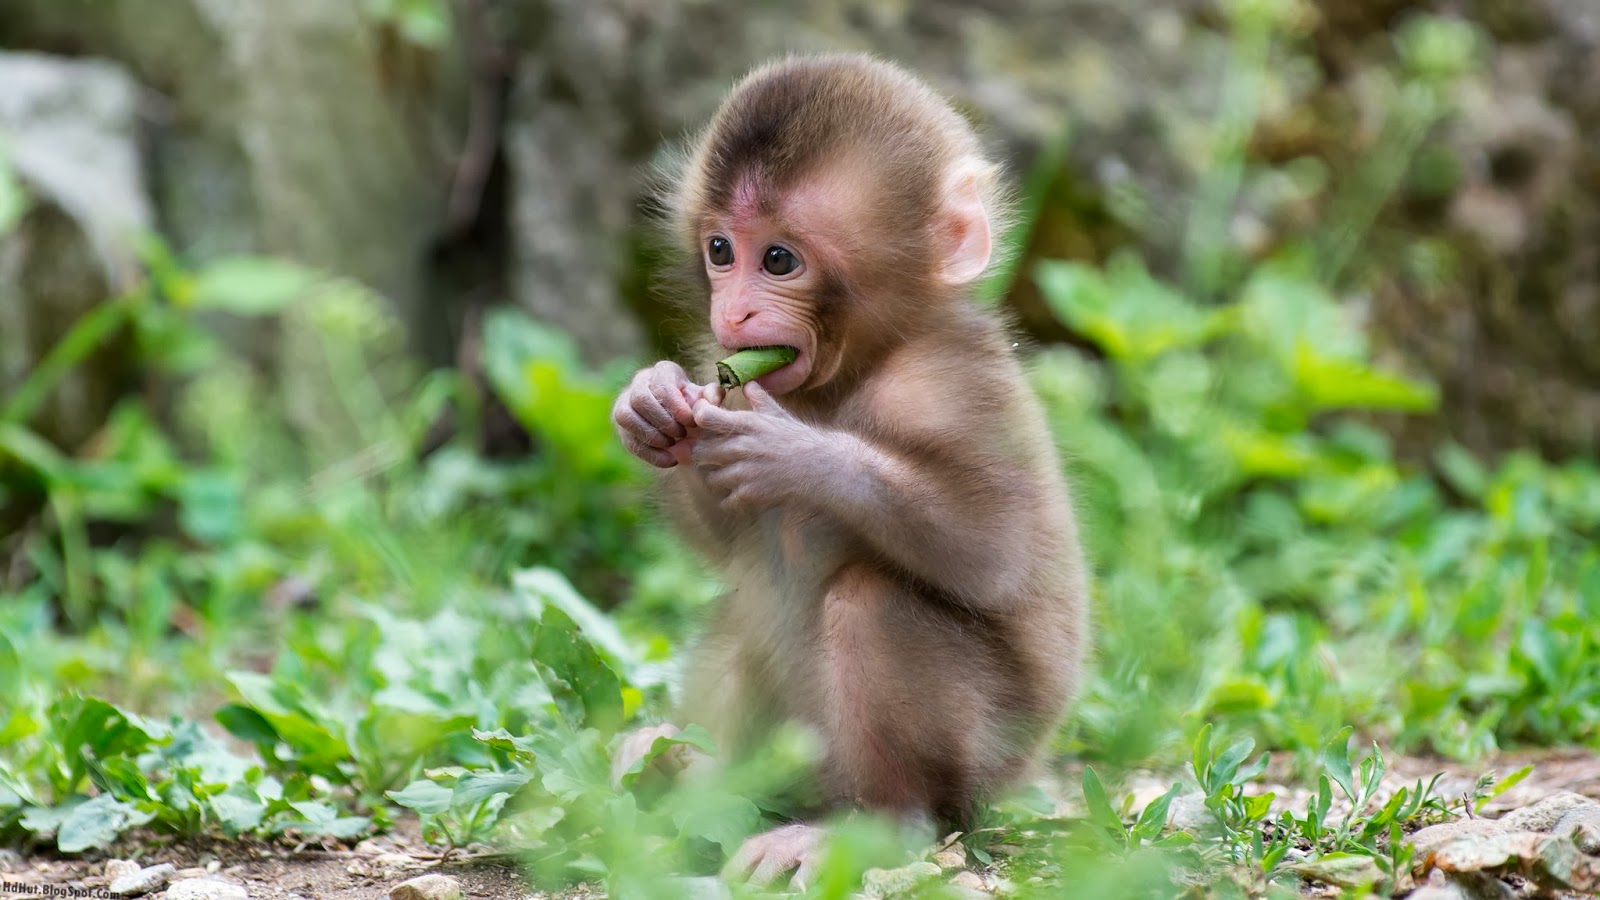 Top Most Cute And Beautiful Monkey Wallpaper In HD New